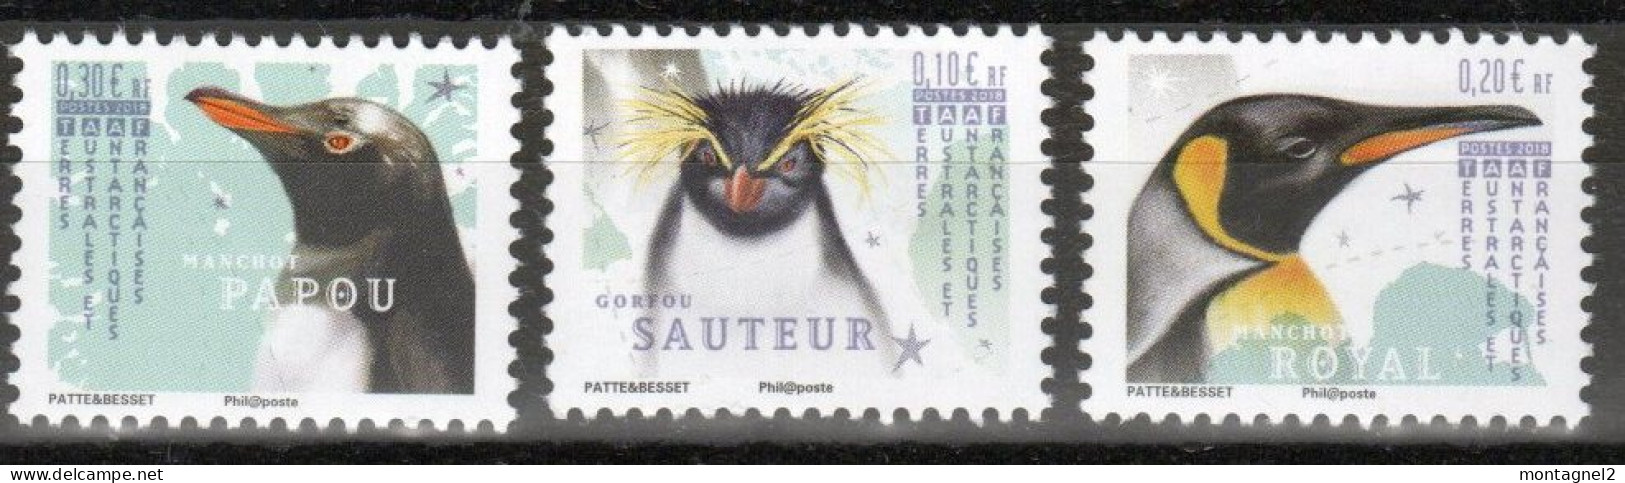 Timbre Des TAAF  N° 871 872 873 Neuf ** - Pinguini